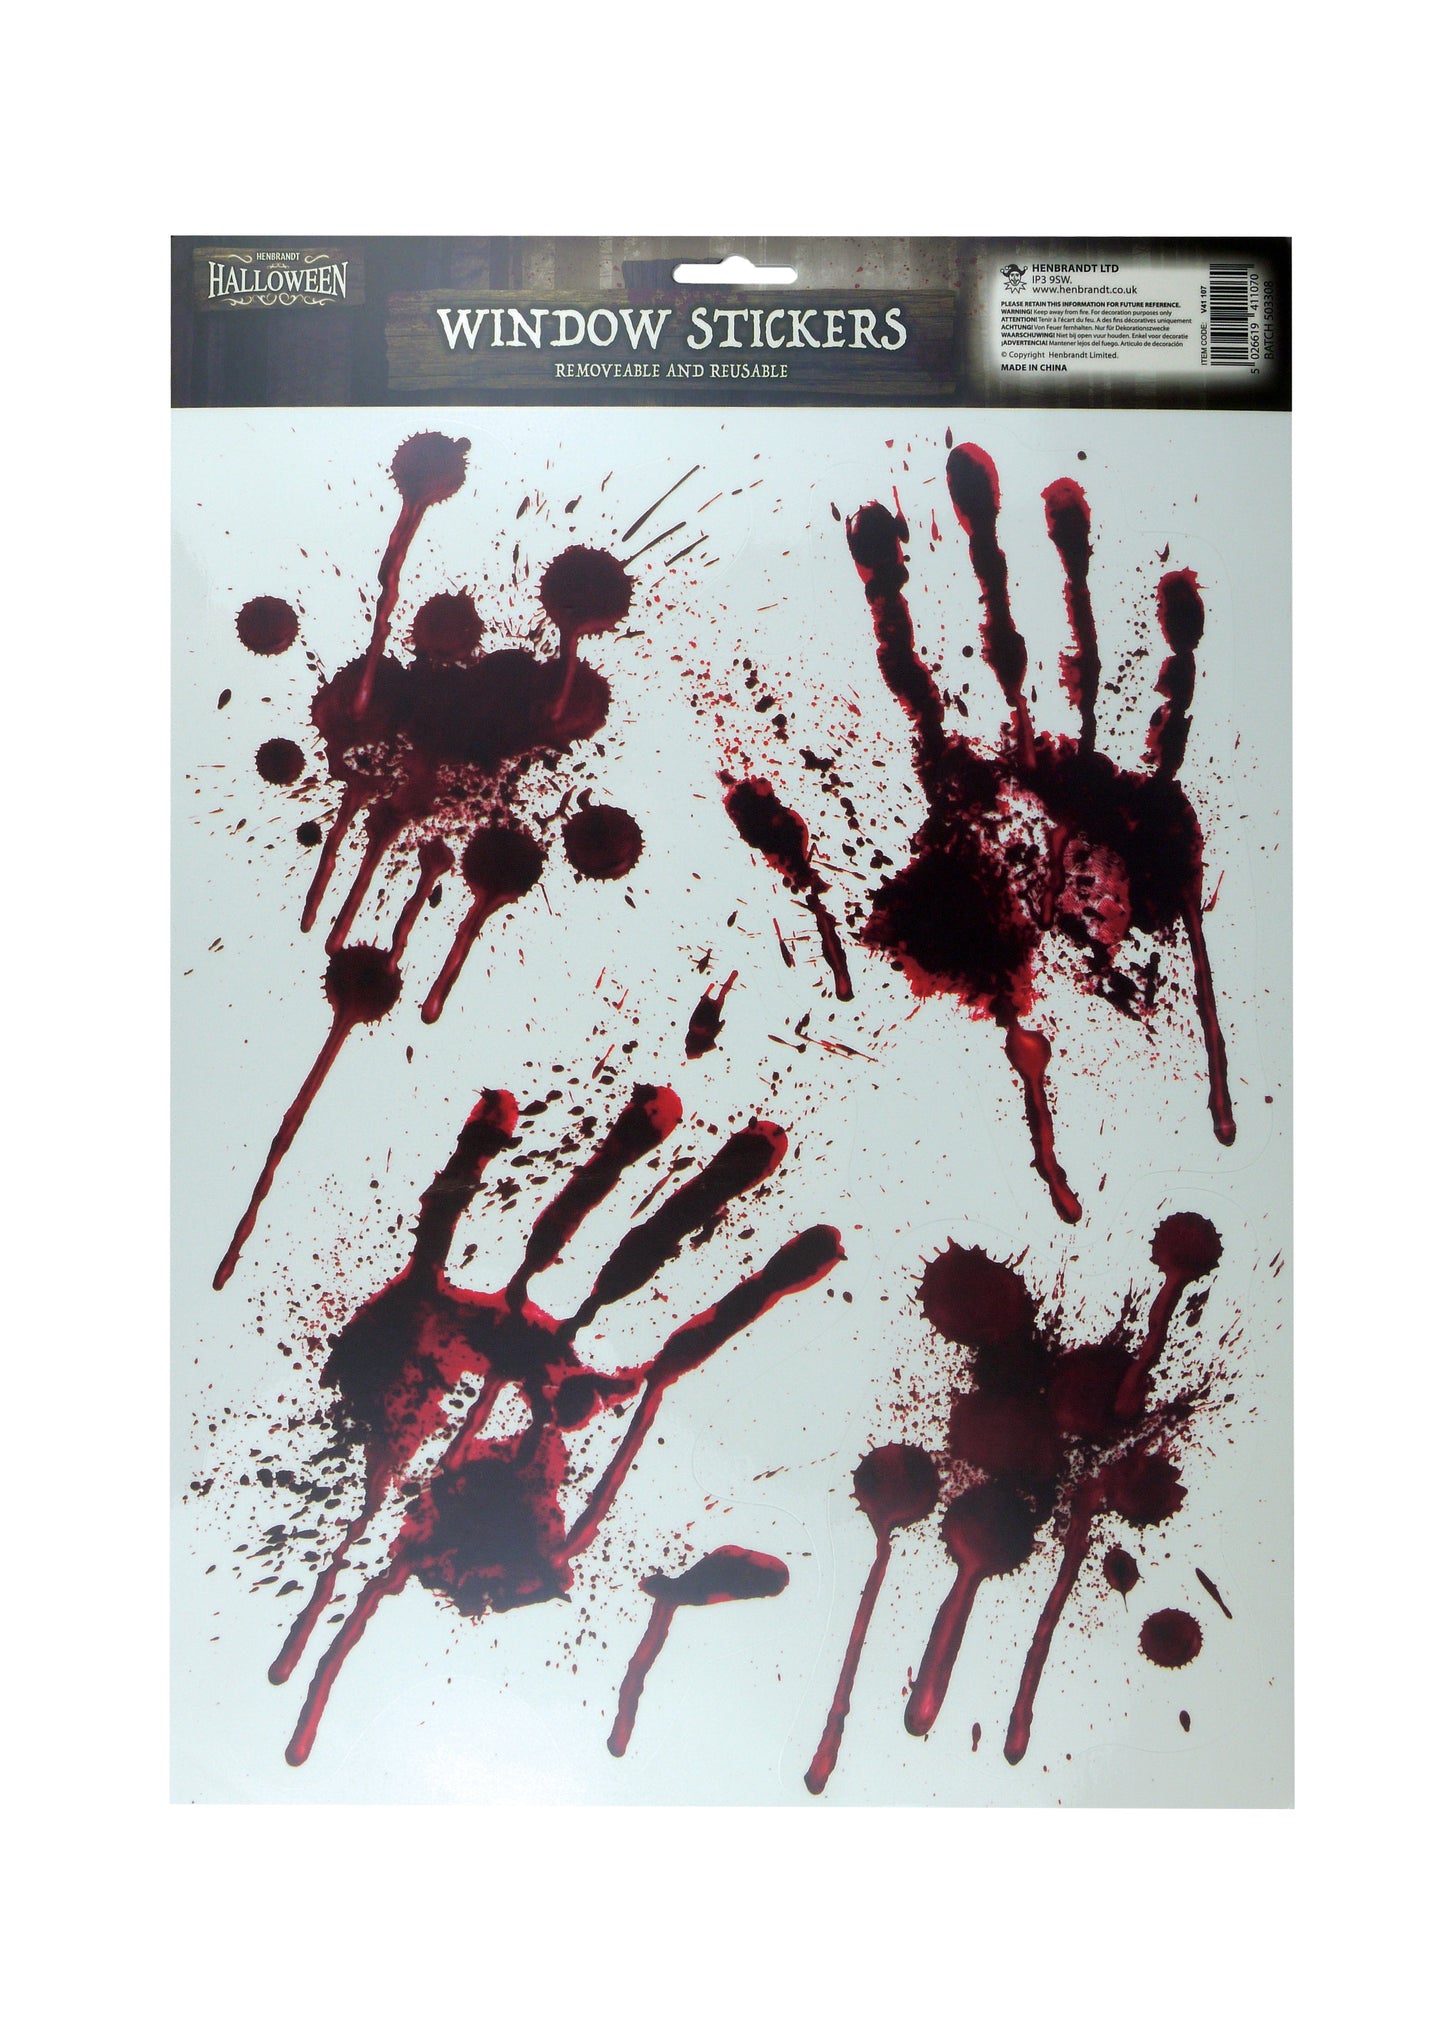 Bloody Hand Window Stickers Removable Reusable Halloween Decorations V41107 (Parcel Rate)